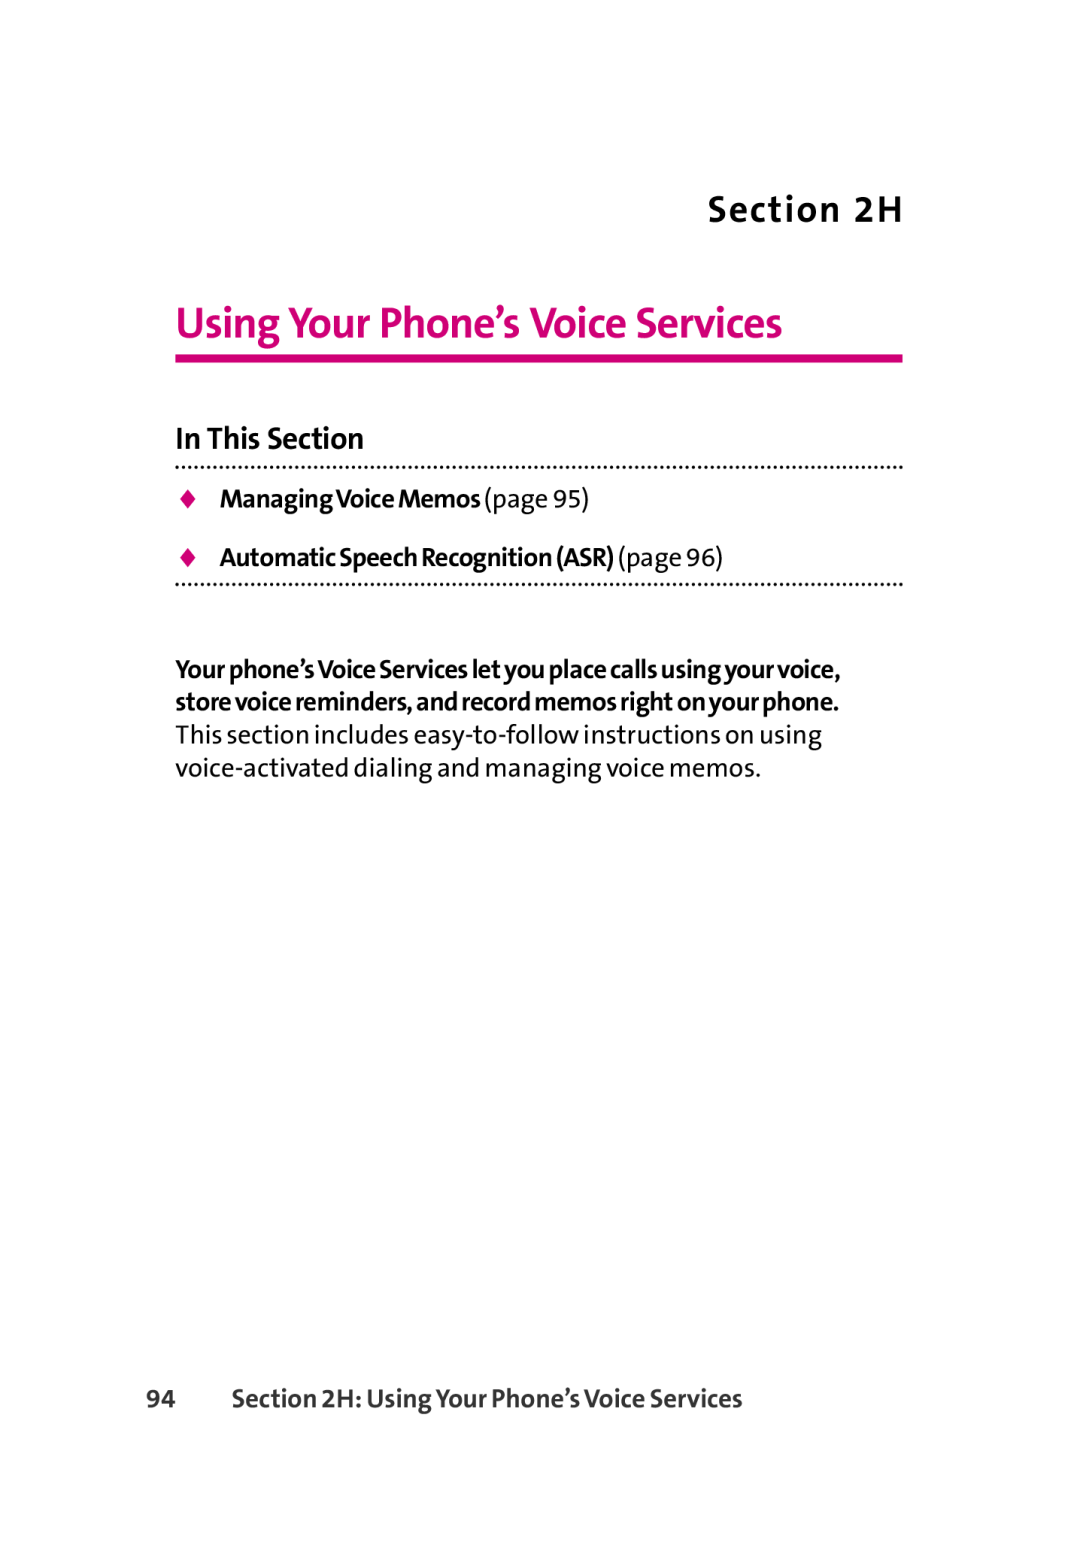 LG Electronics 350 manual Using Your Phone’s Voice Services, H, ManagingVoiceMemospage AutomaticSpeechRecognitionASRpage 